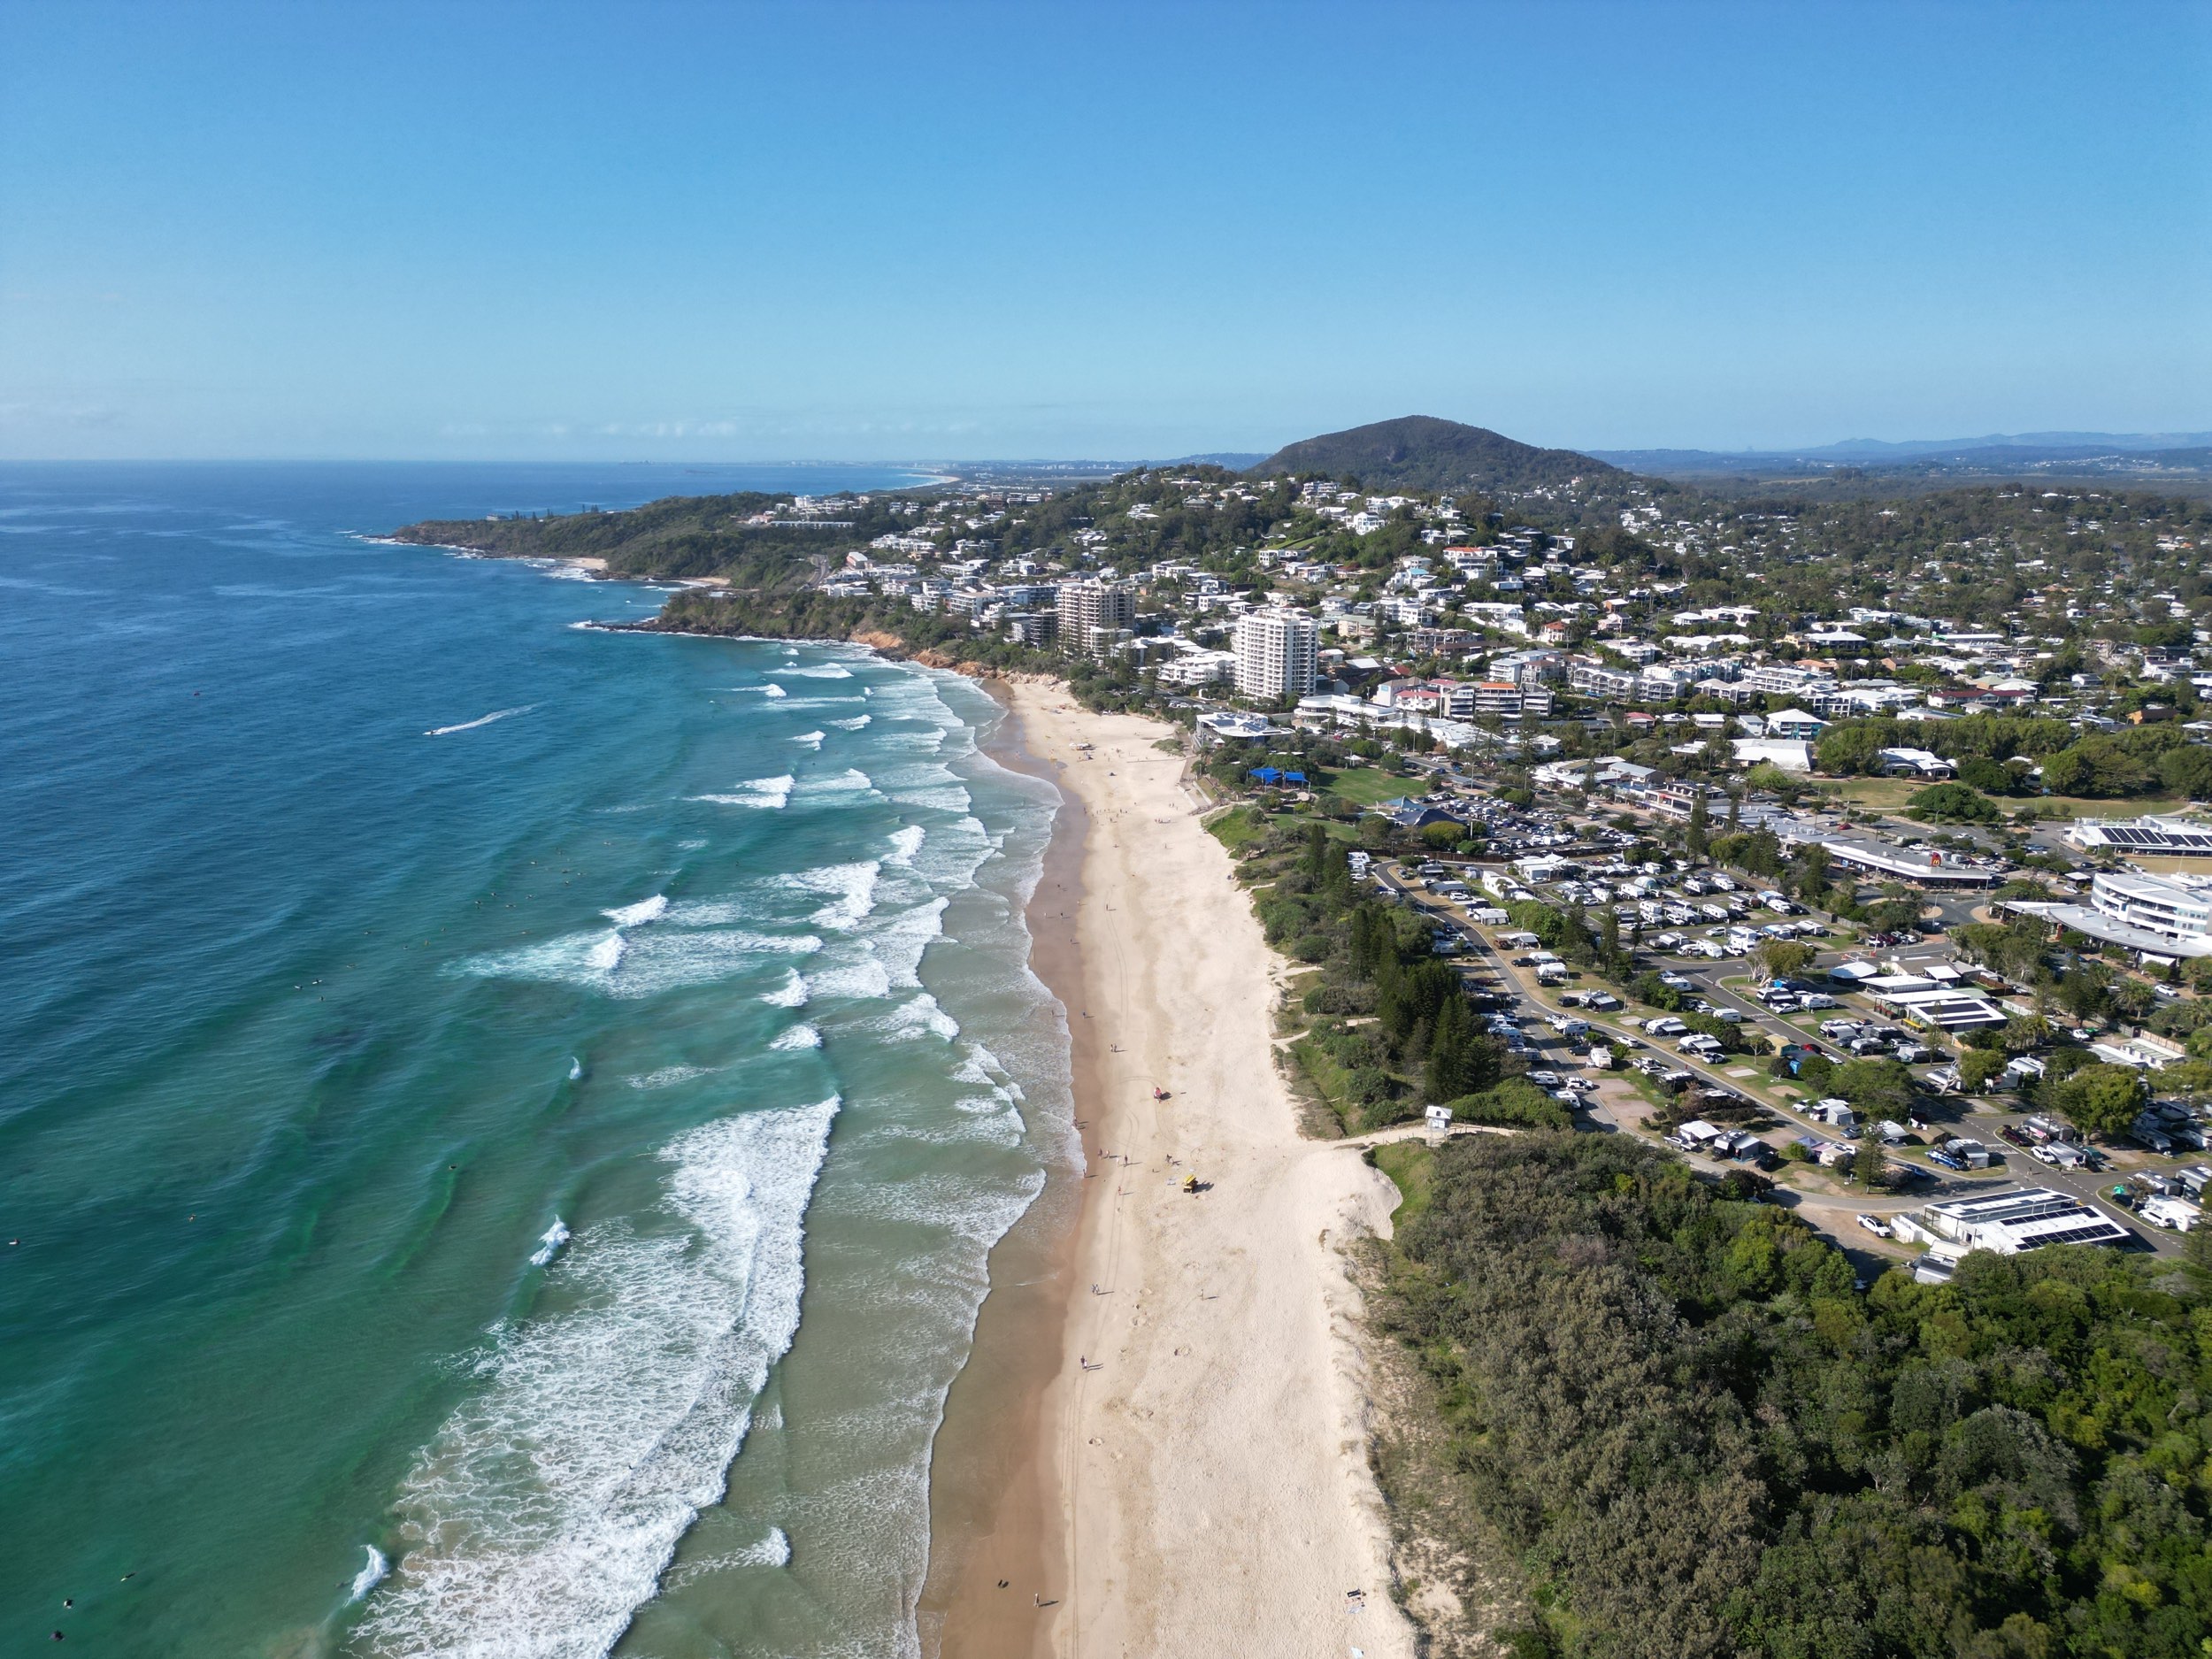 Aerial, drone view of the amazing Coolum Beach on the Sunshine Coast north of Brisbane Queensland Australia. Beautiful beachfront with breaking ocean waves.